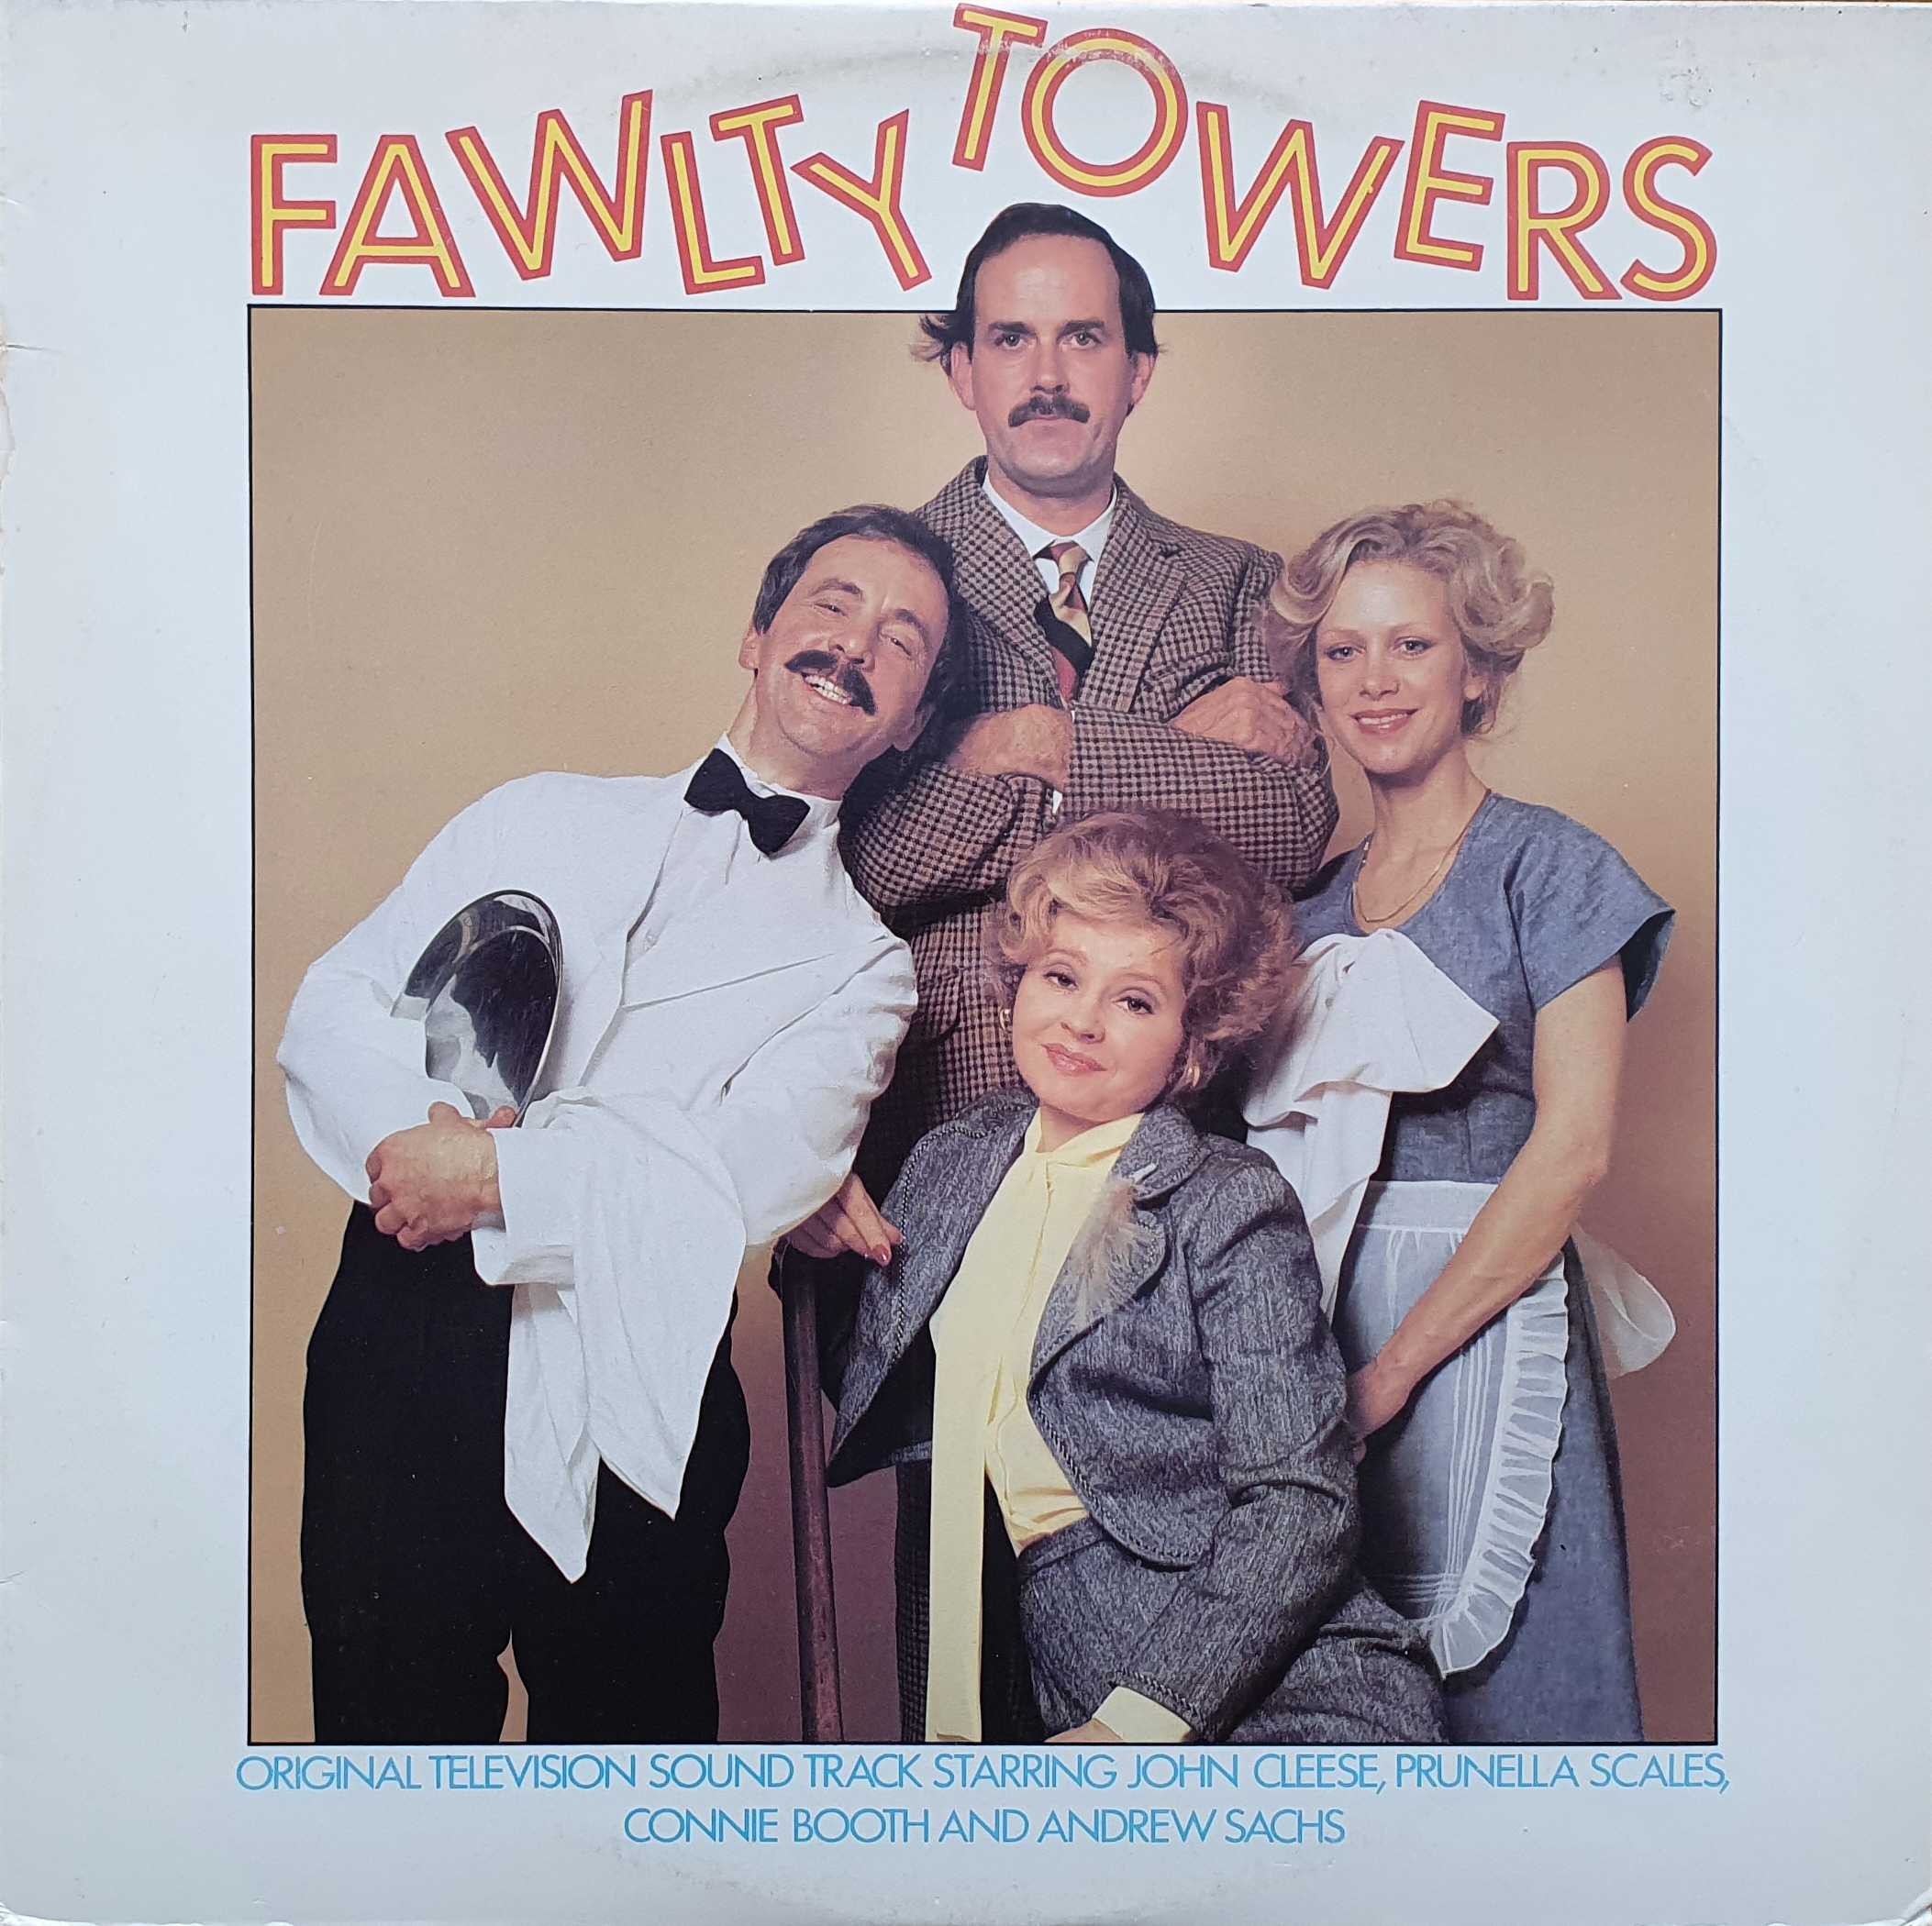 Picture of 2964 051 Fawlty Towers by artist John Cleese / Connie Booth from the BBC albums - Records and Tapes library